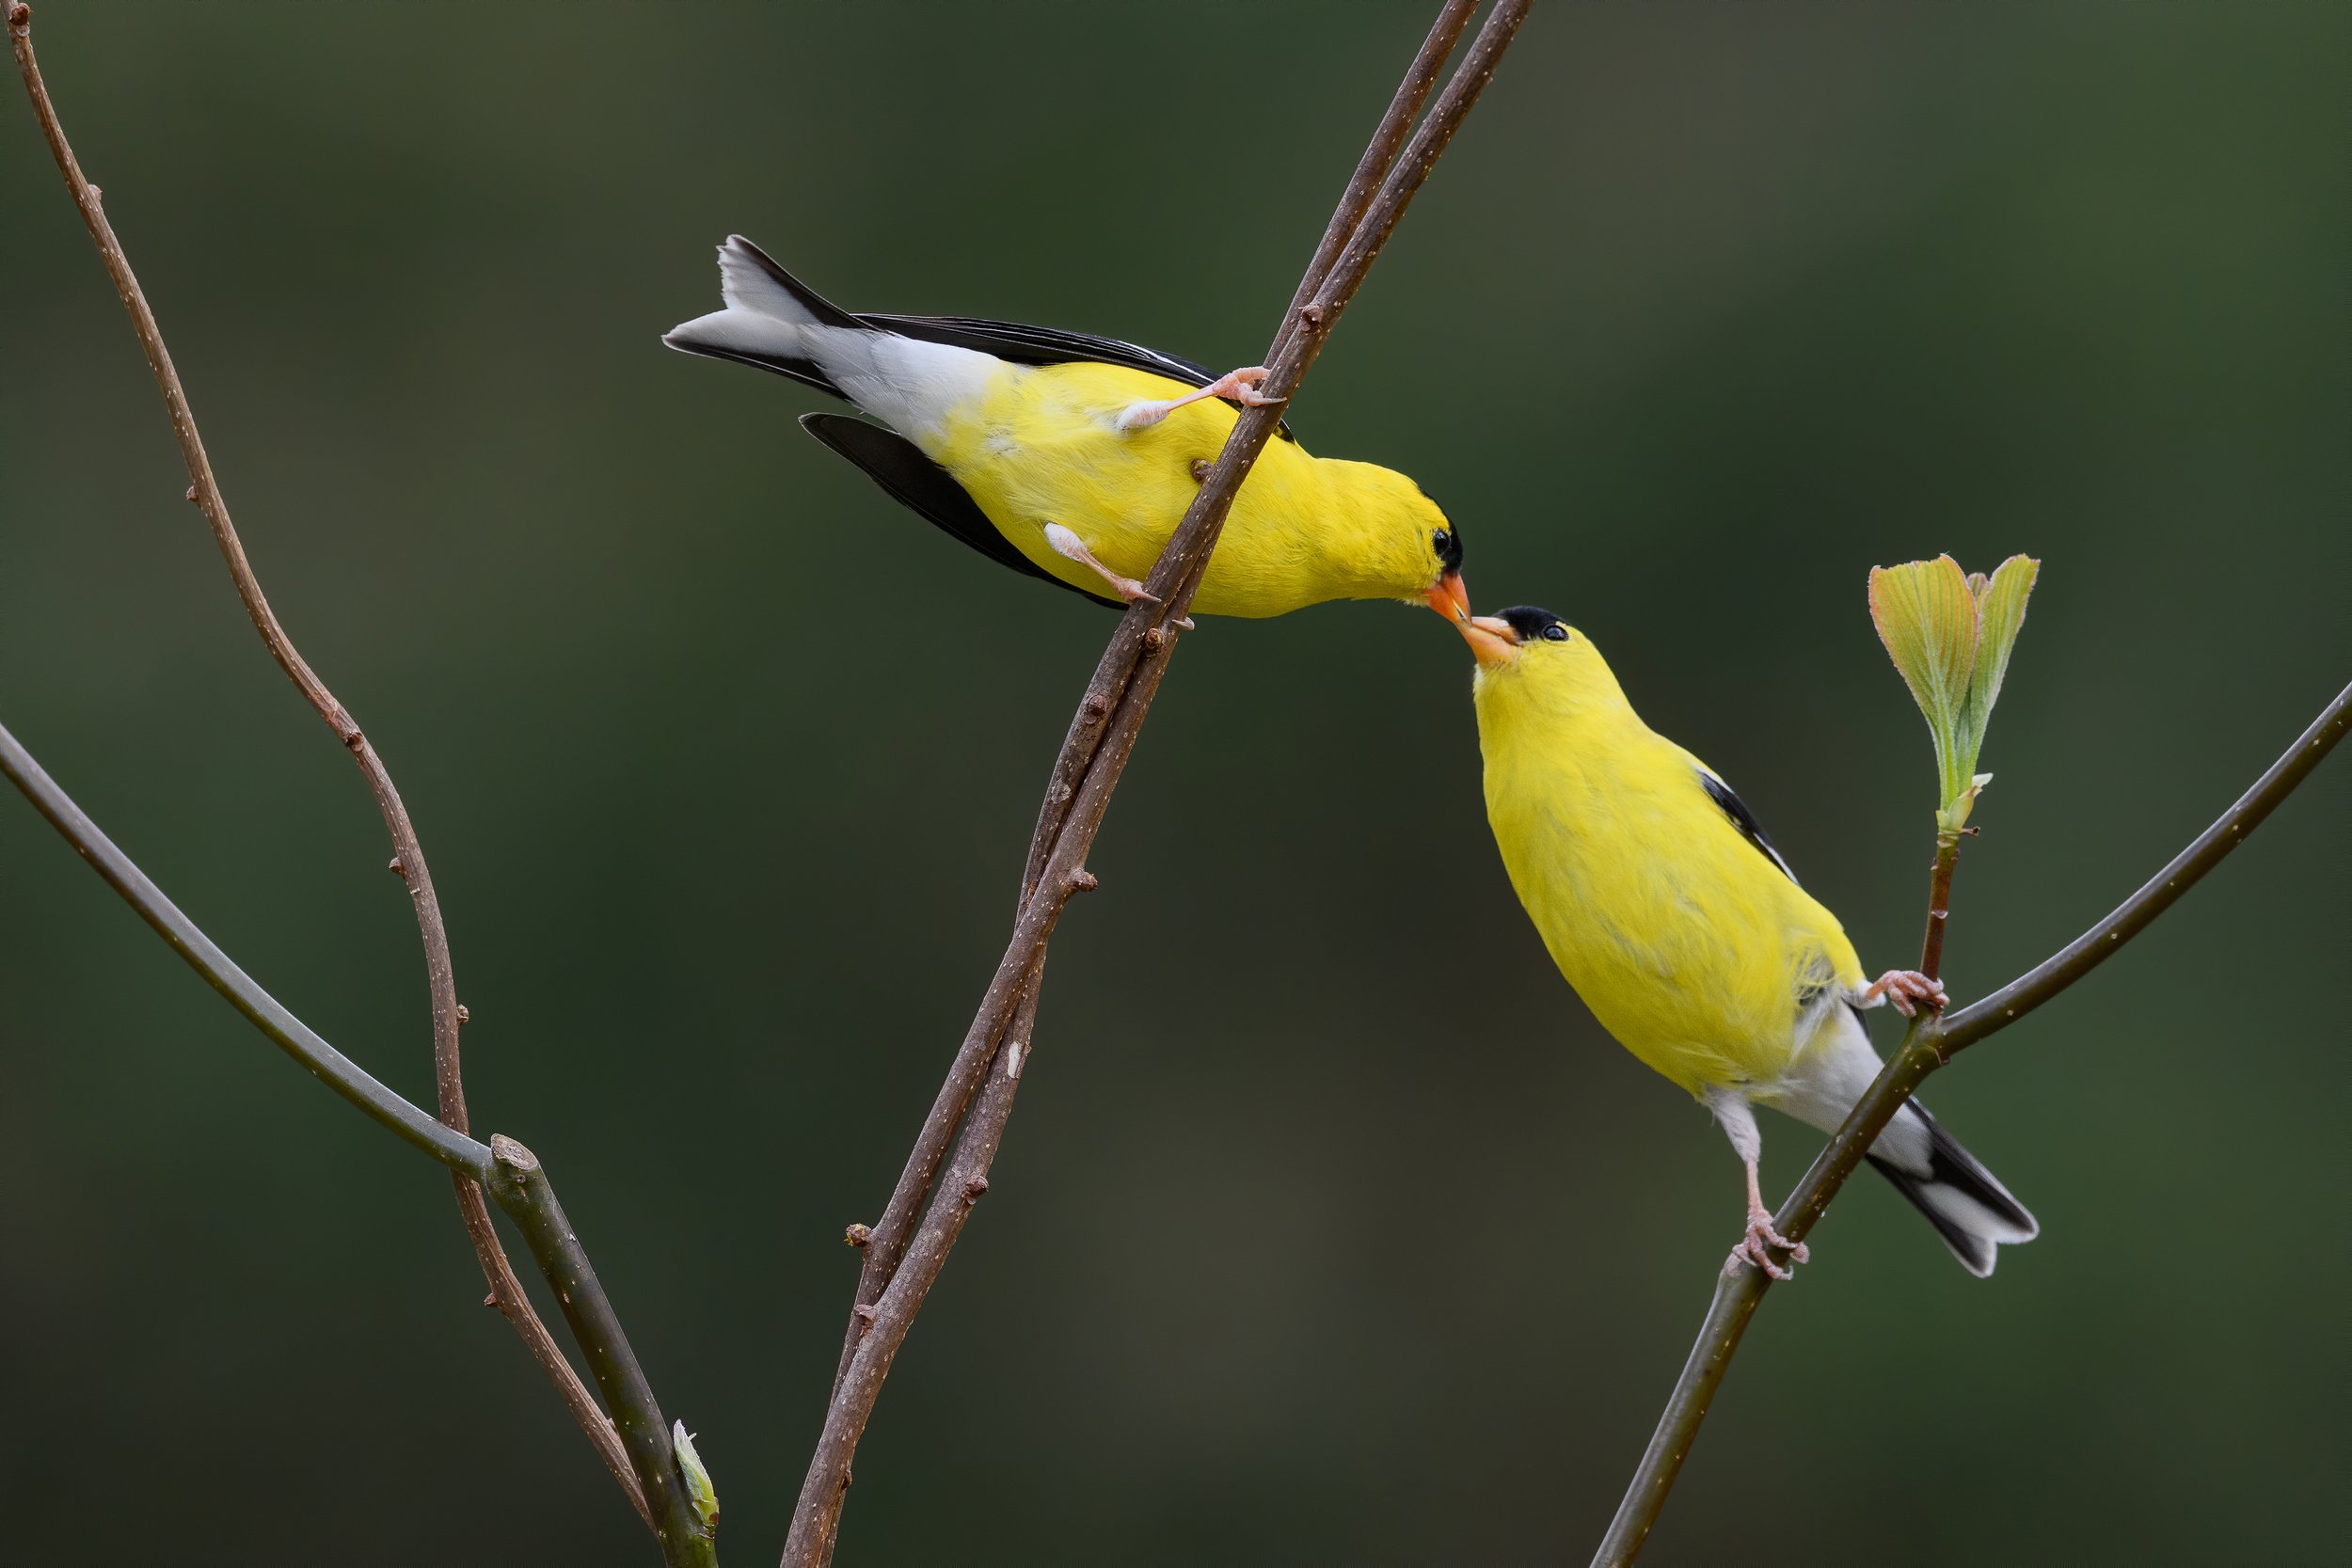 Male Goldfinches by Ann Pacheco